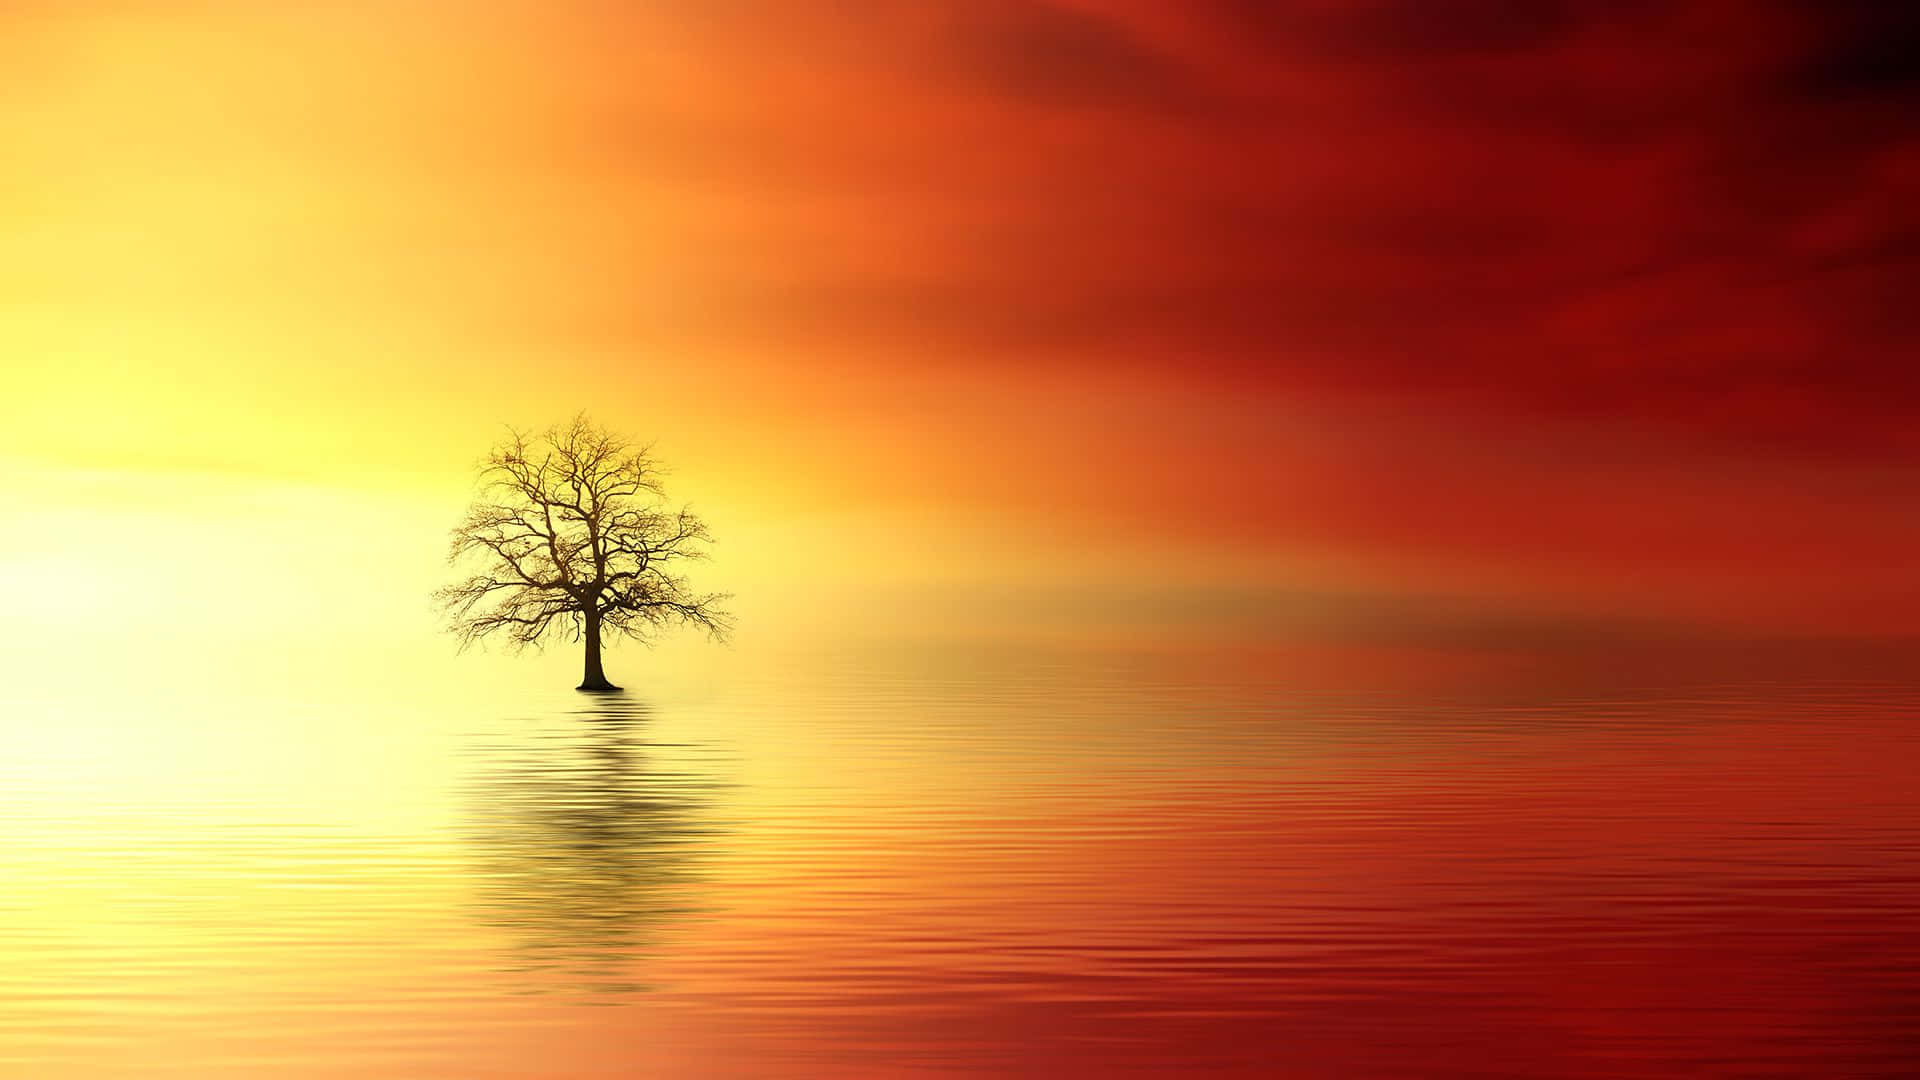 Solitary Tree Sunset Reflection Wallpaper